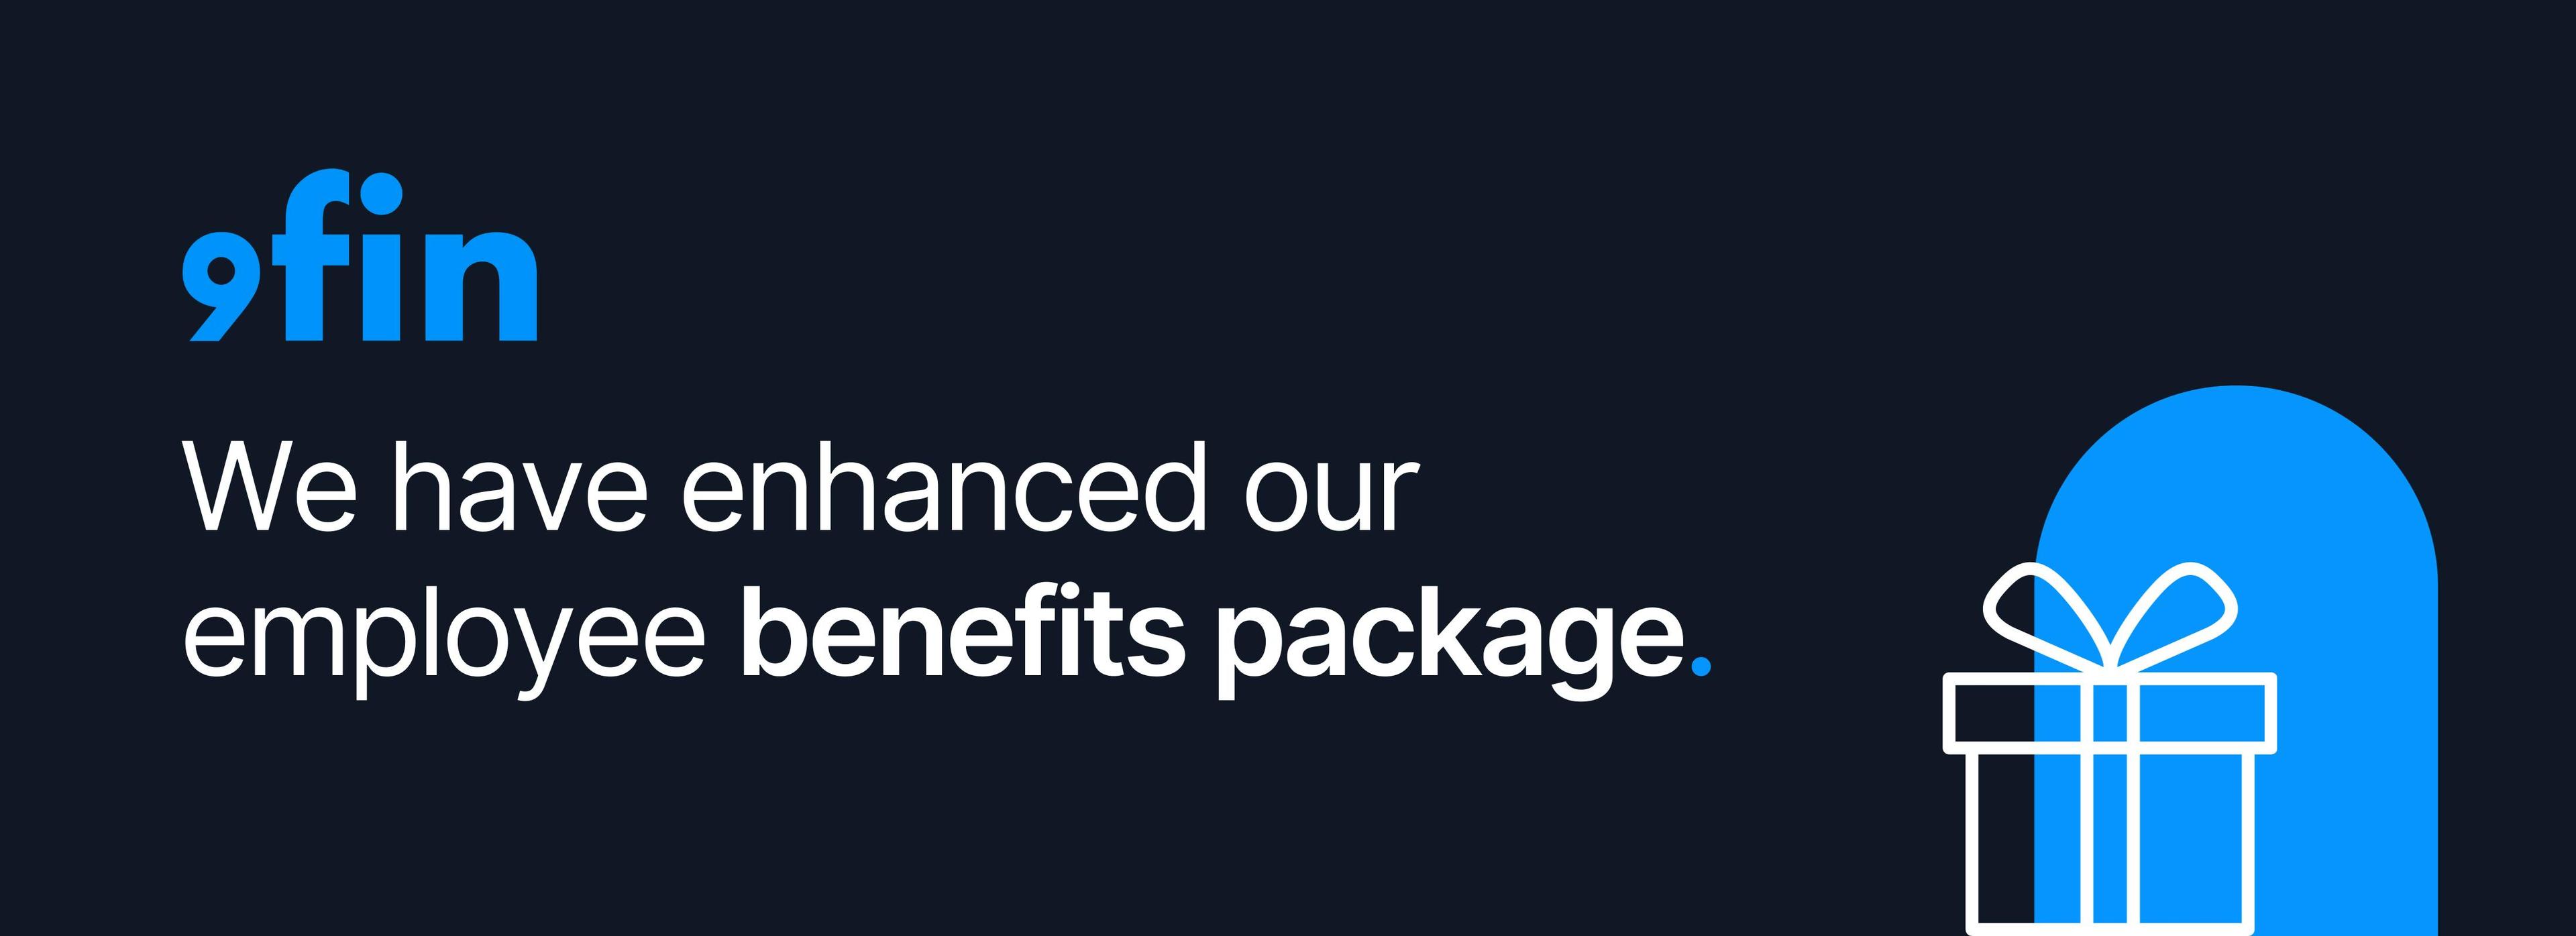 Enhancing 9fin’s benefits package